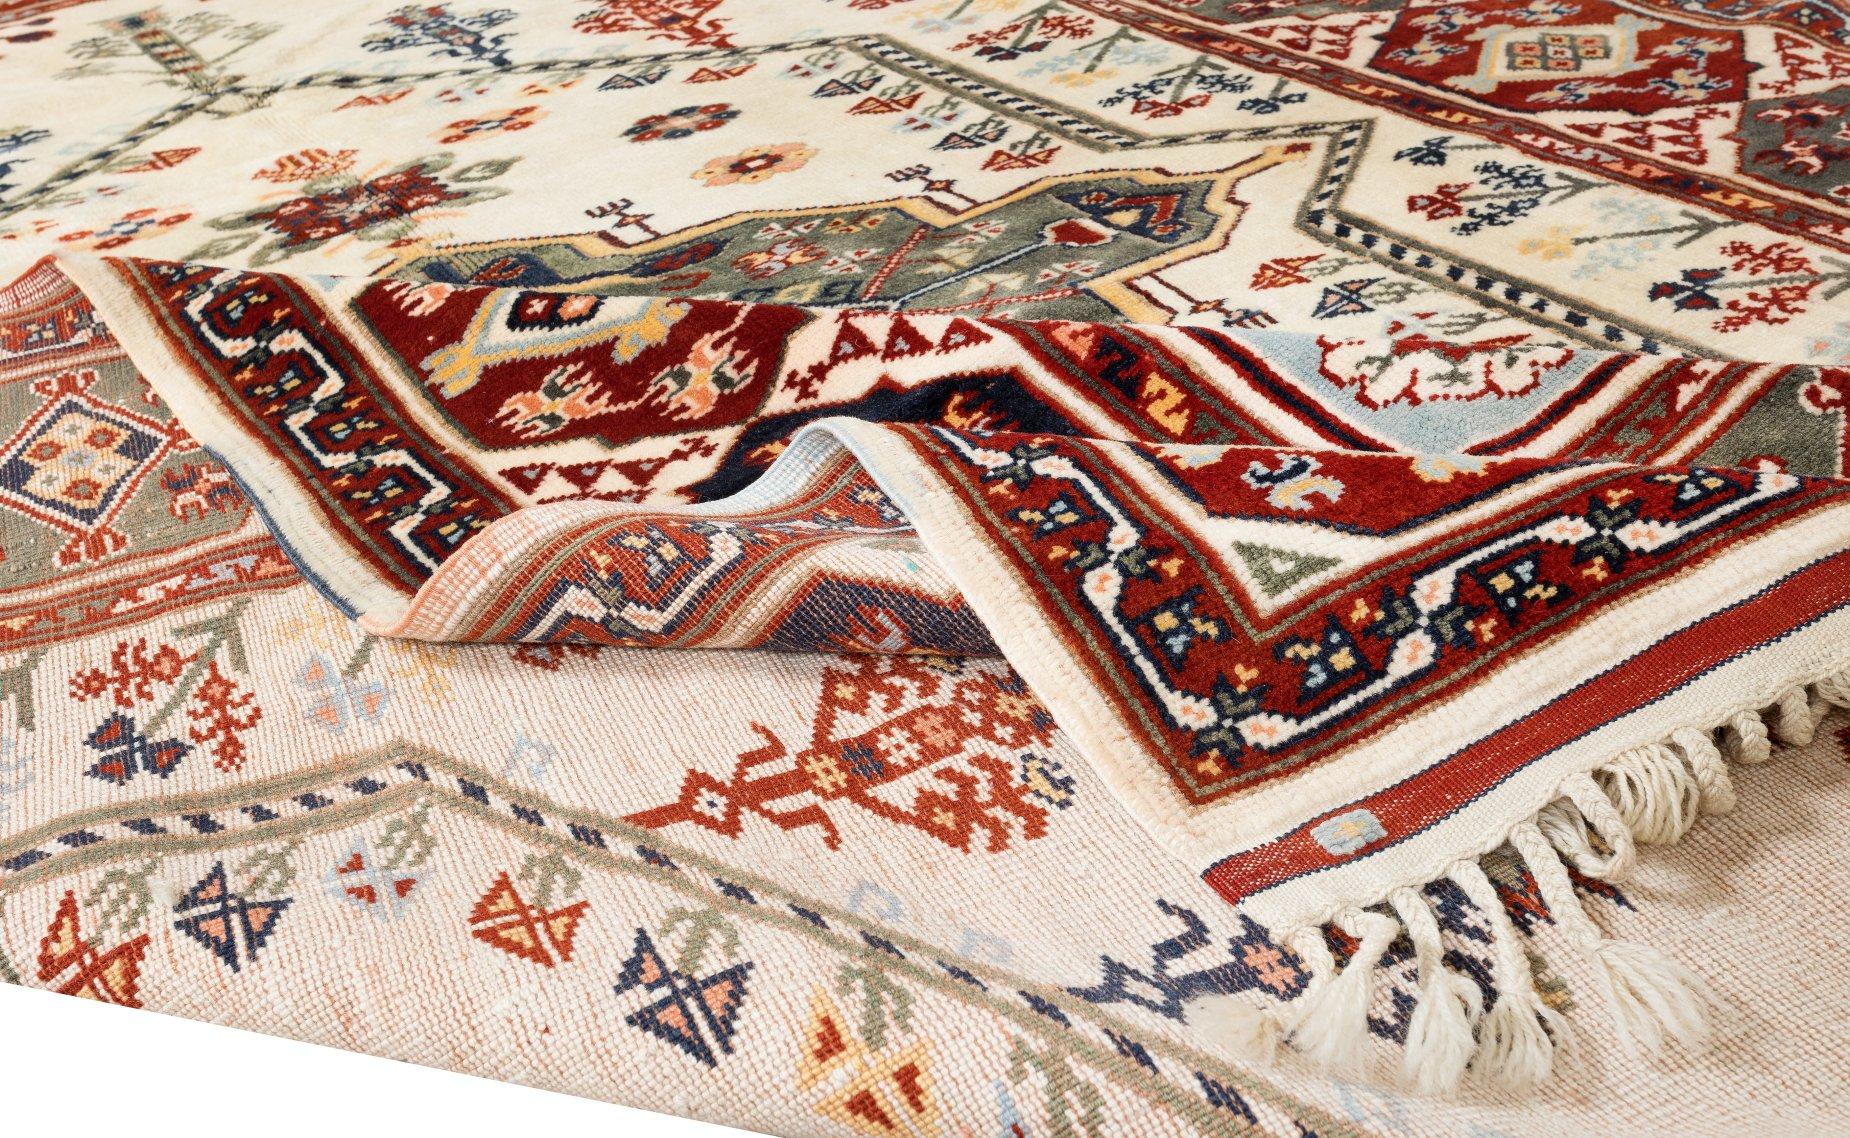 Tribal 6.3x8.2 Ft Vintage Hand Knotted Turkish Rug, One-of-a-kind Traditional Carpet For Sale